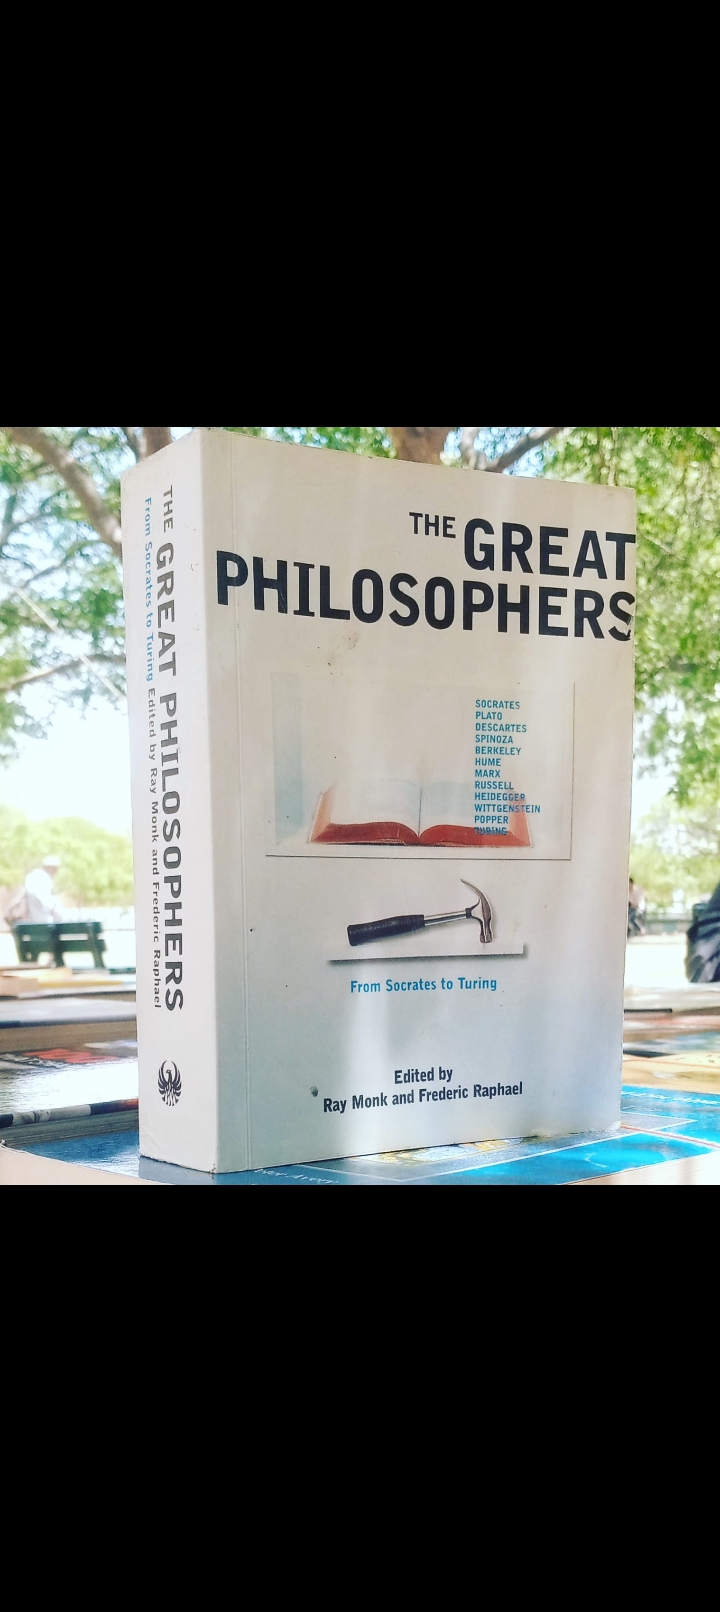 the great philosopher from socrates to turing edited by ray monk. original paperback